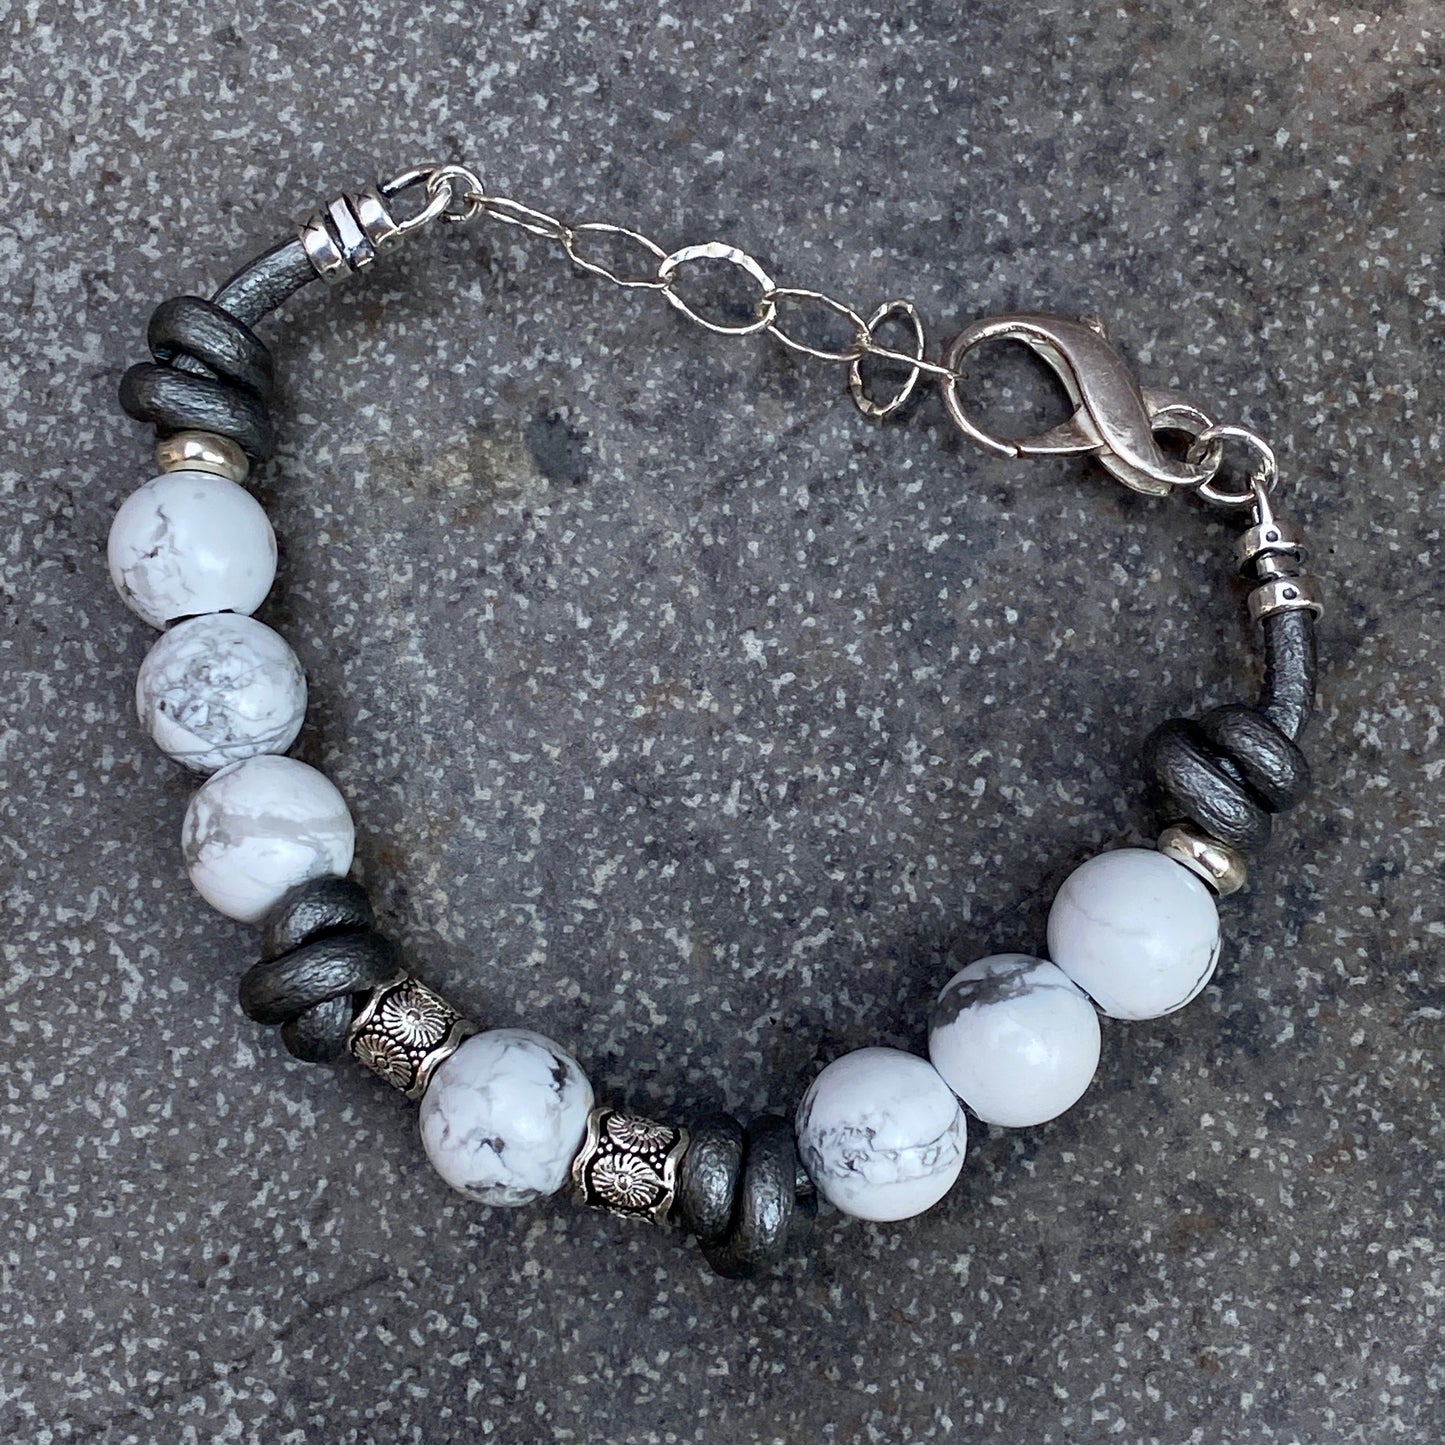 Women’s Howlite gemstone and Sterling Silver Bracelet on Leather